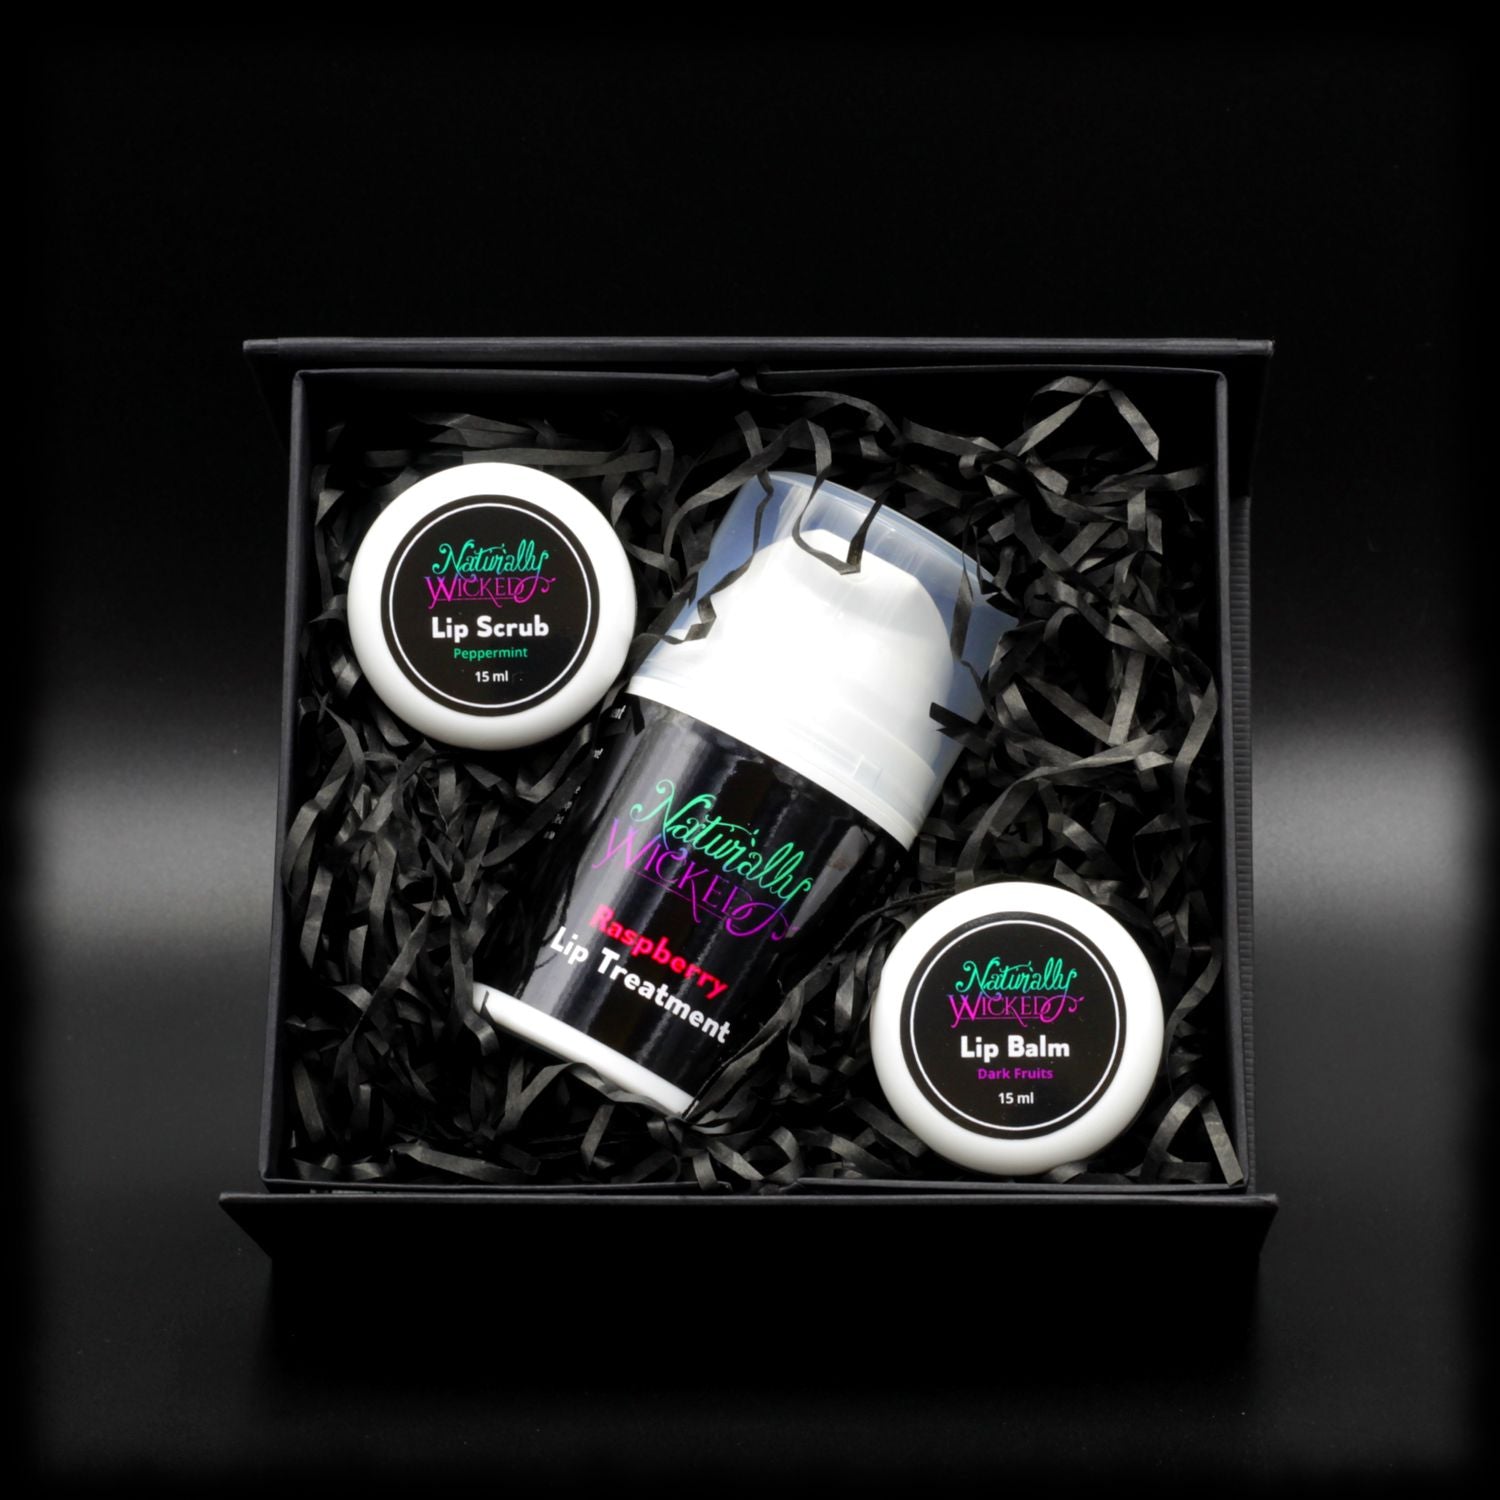 Naturally Wicked Peppermint Lip Scrub, Raspberry Lip Treatment & Dark Fruits Lip Balm Within Black Gift Packaging In Naturally Wicked Original Box